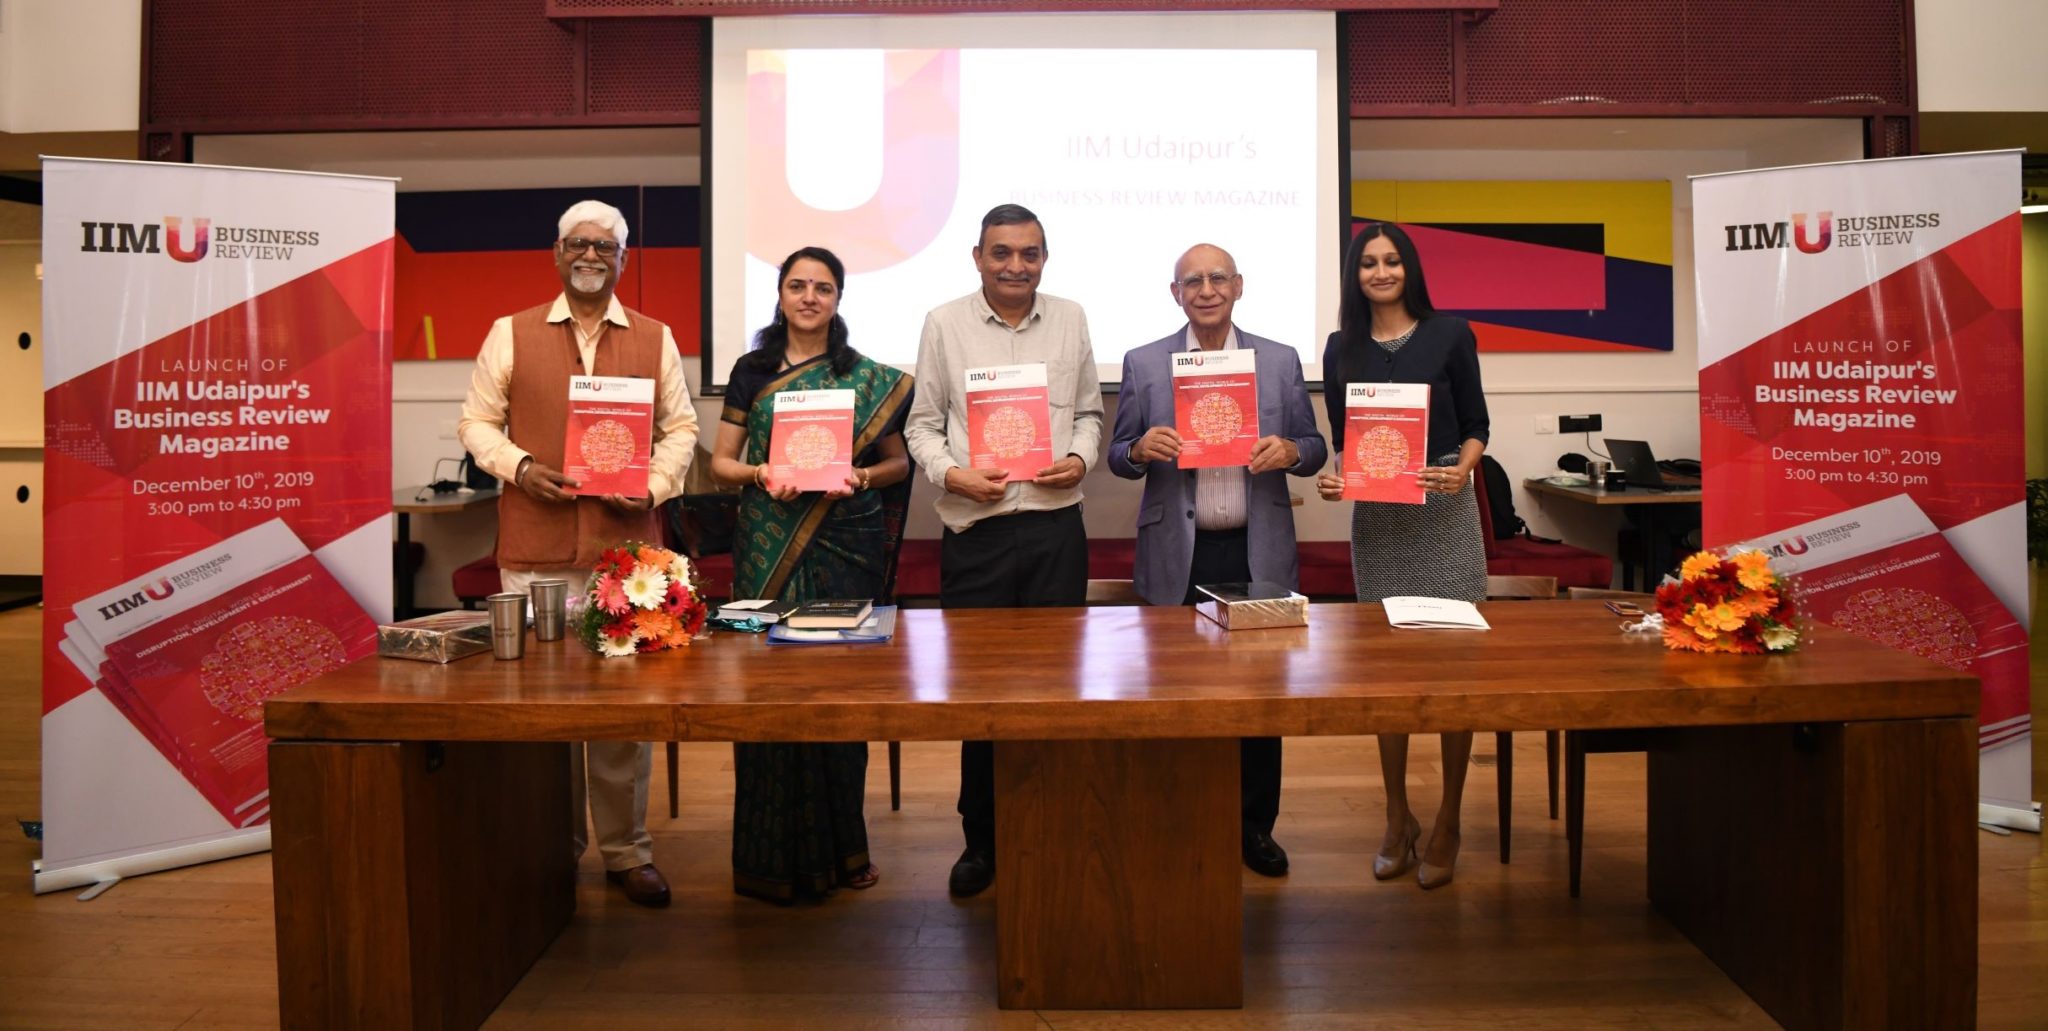 iim-udaipur-launches-business-review-magazine-encompassing-impact-oriented-research-and-insights-valuable